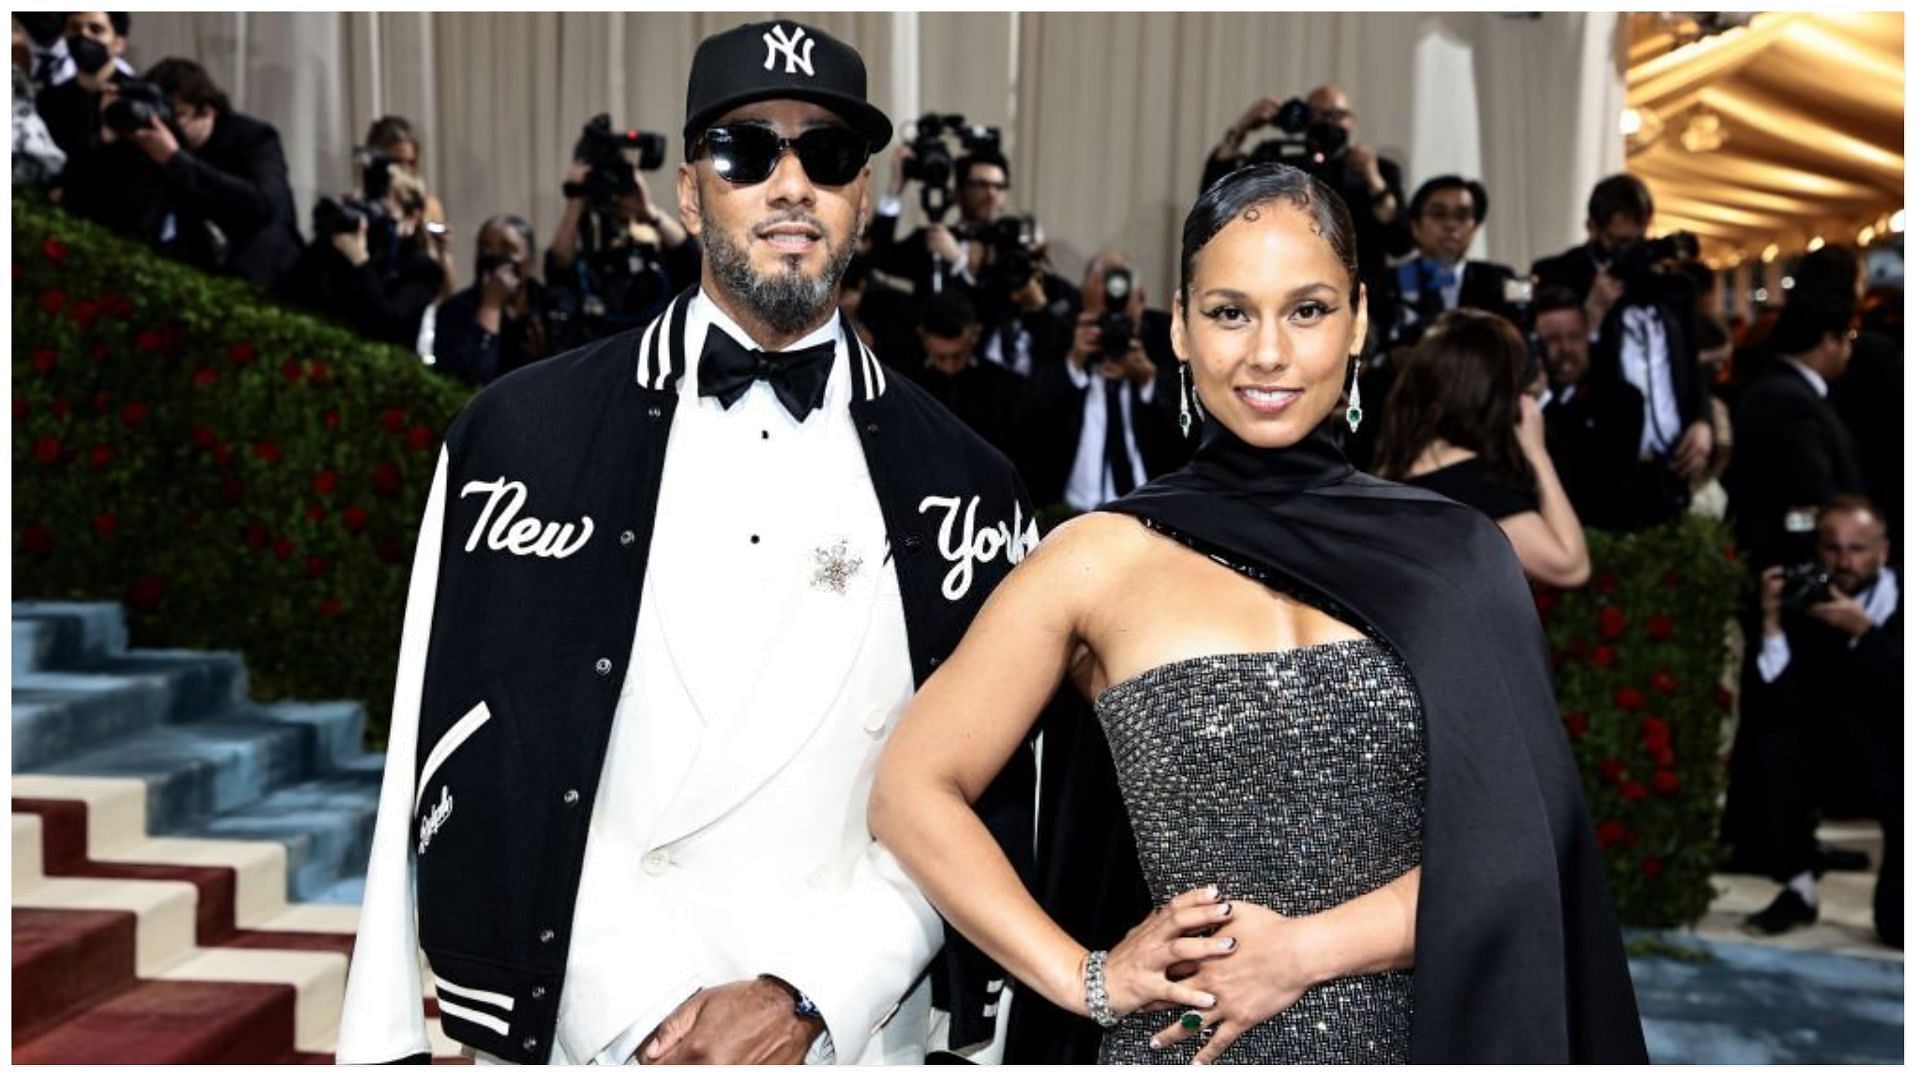 Swizz Beatz gifted an expensive necklace to his wife Alicia Keys (Image via Dimitrios Kambouris/Getty Images)